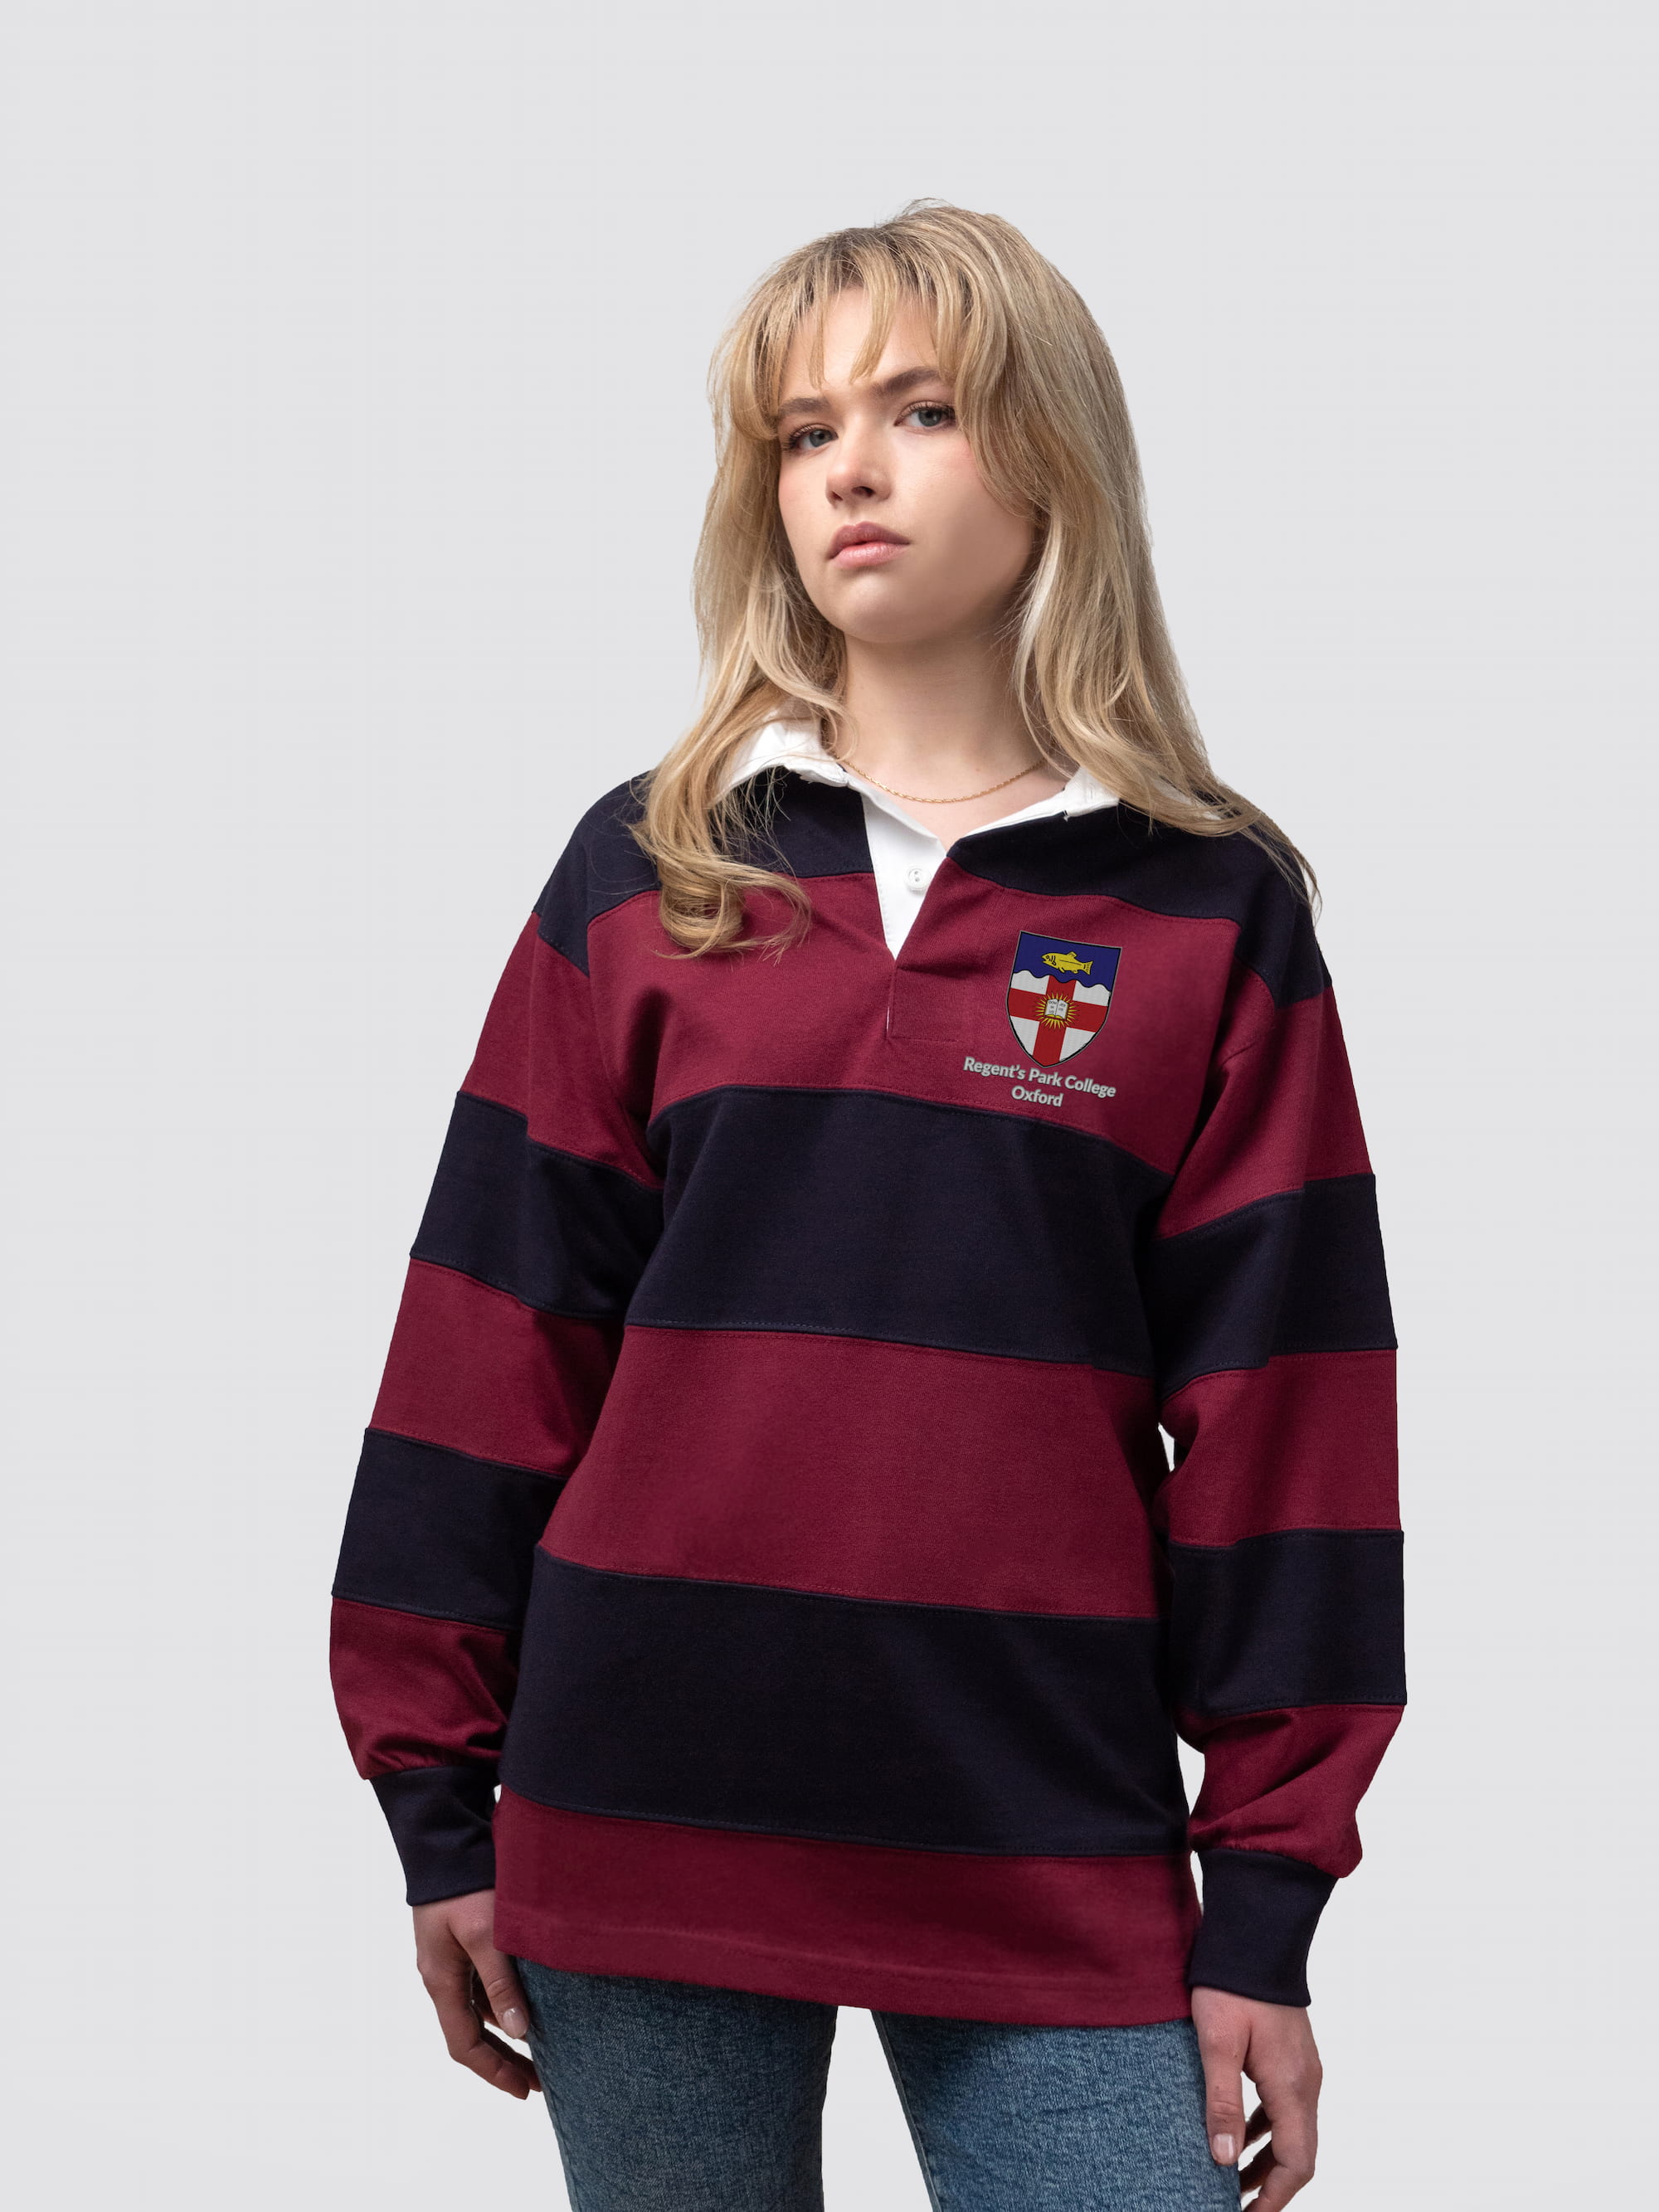 Regent's Park College rugby shirt, with burgundy and navy stripes